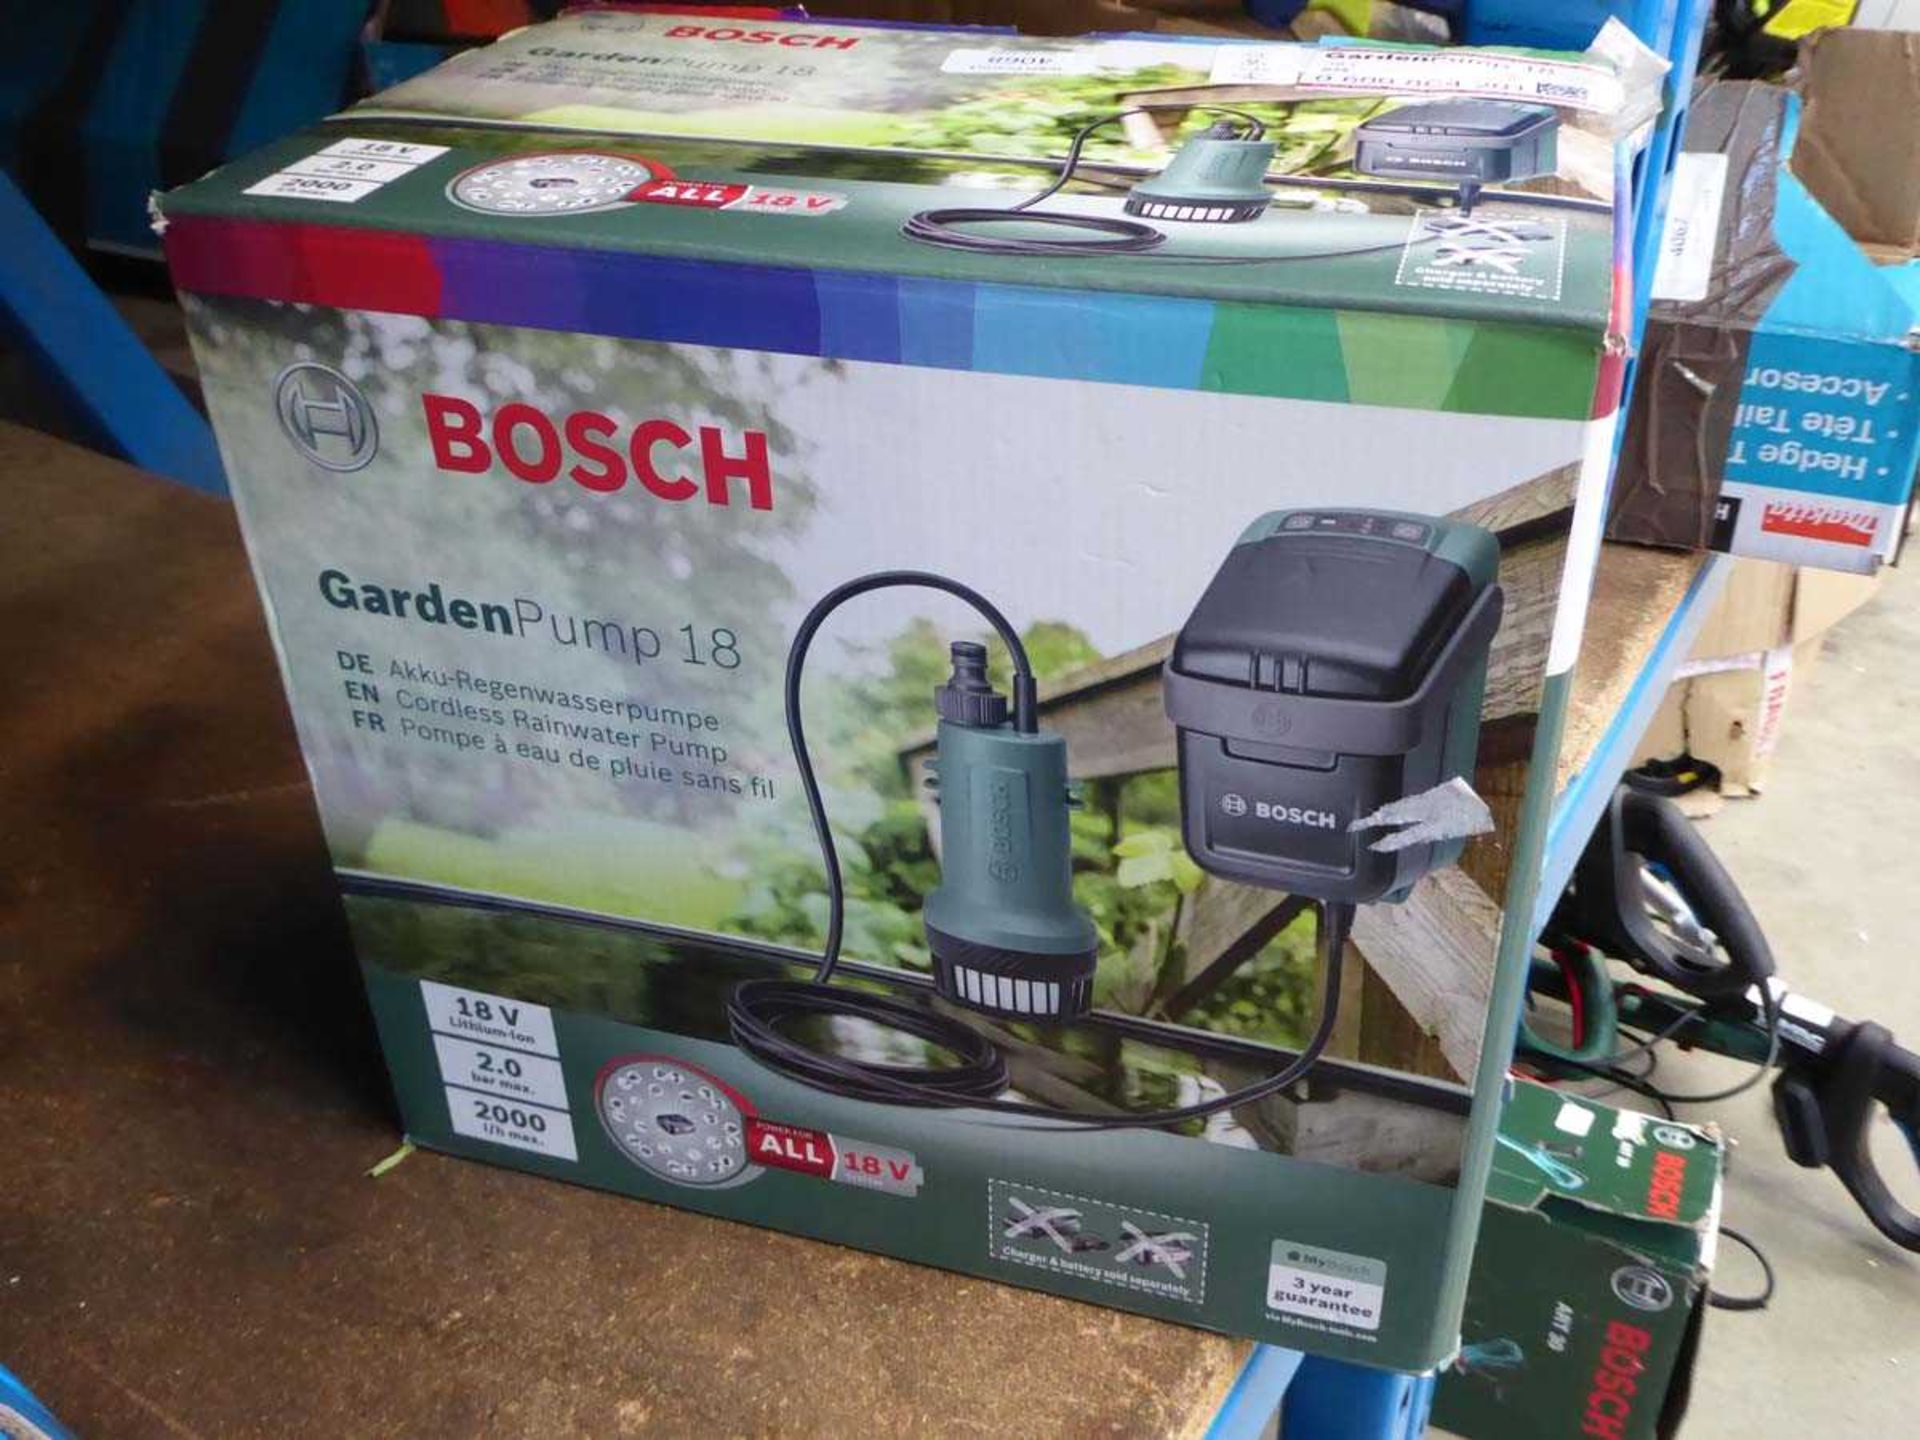 Bosch boxed submersible pump